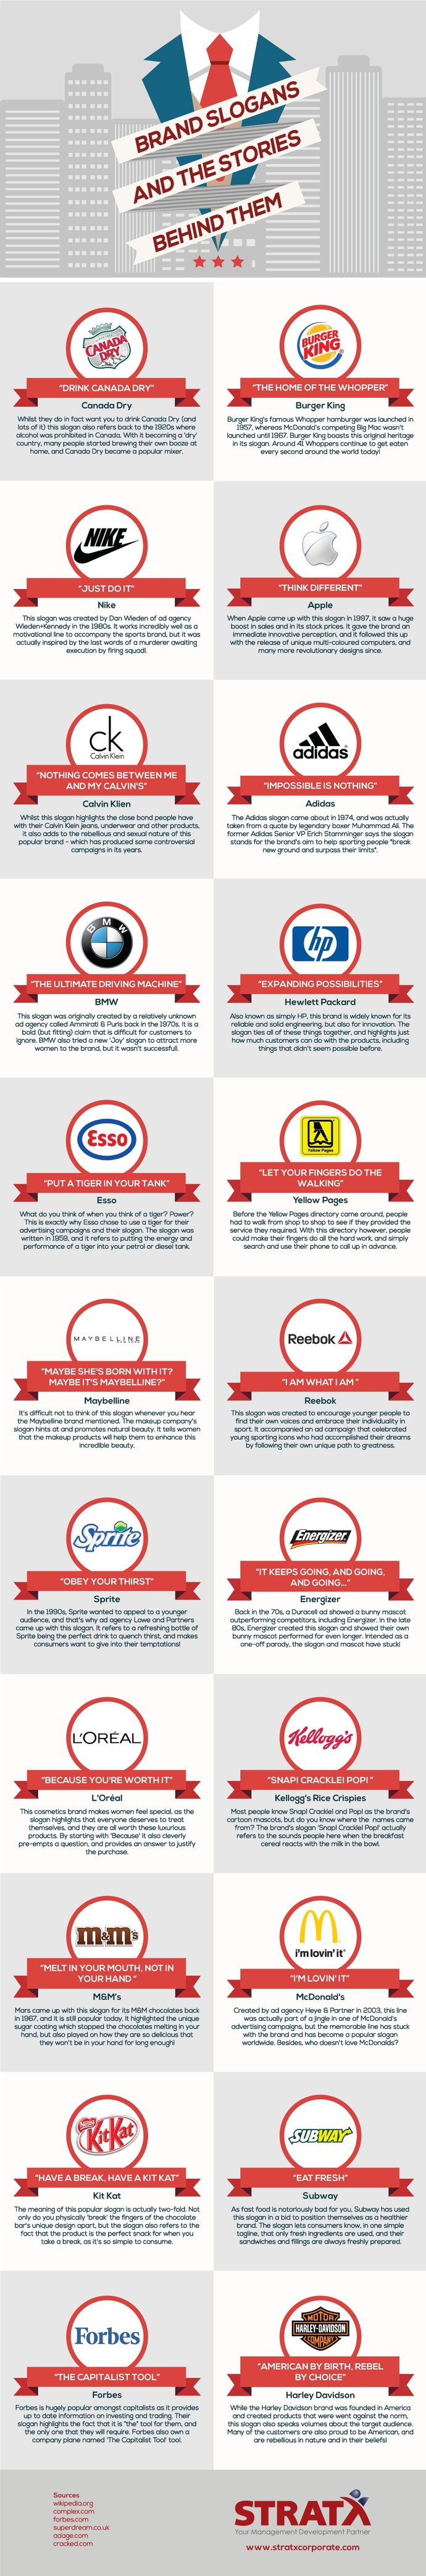 22 Famous Brand Slogans the Little-Known Stories Behind Them) [Infographic]